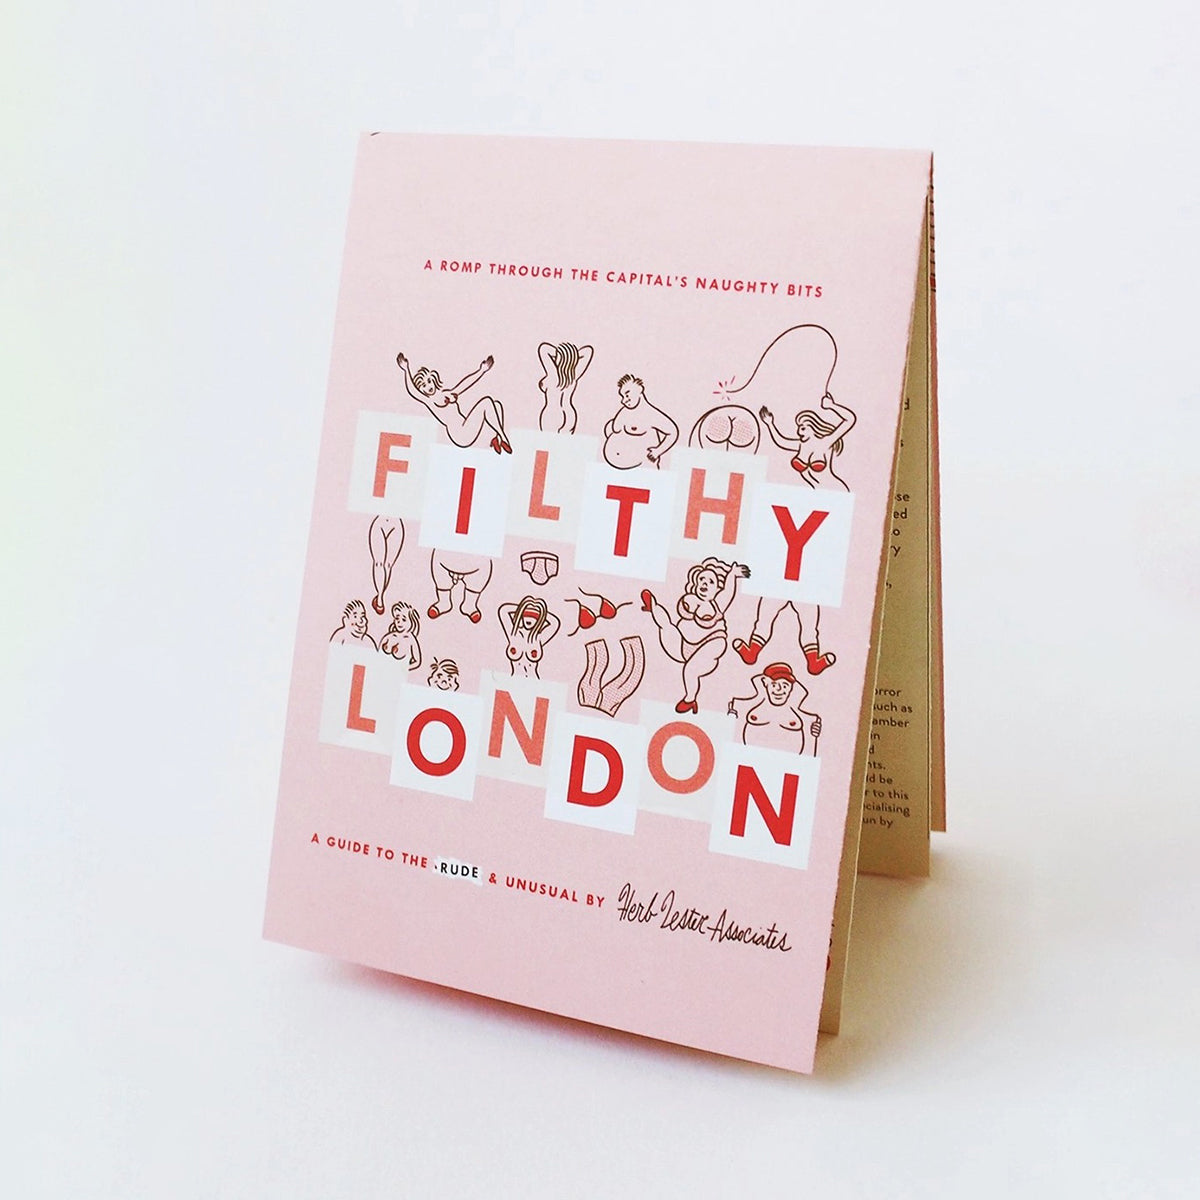 Herb Lester Filthy London Art Map + Cultural Guide